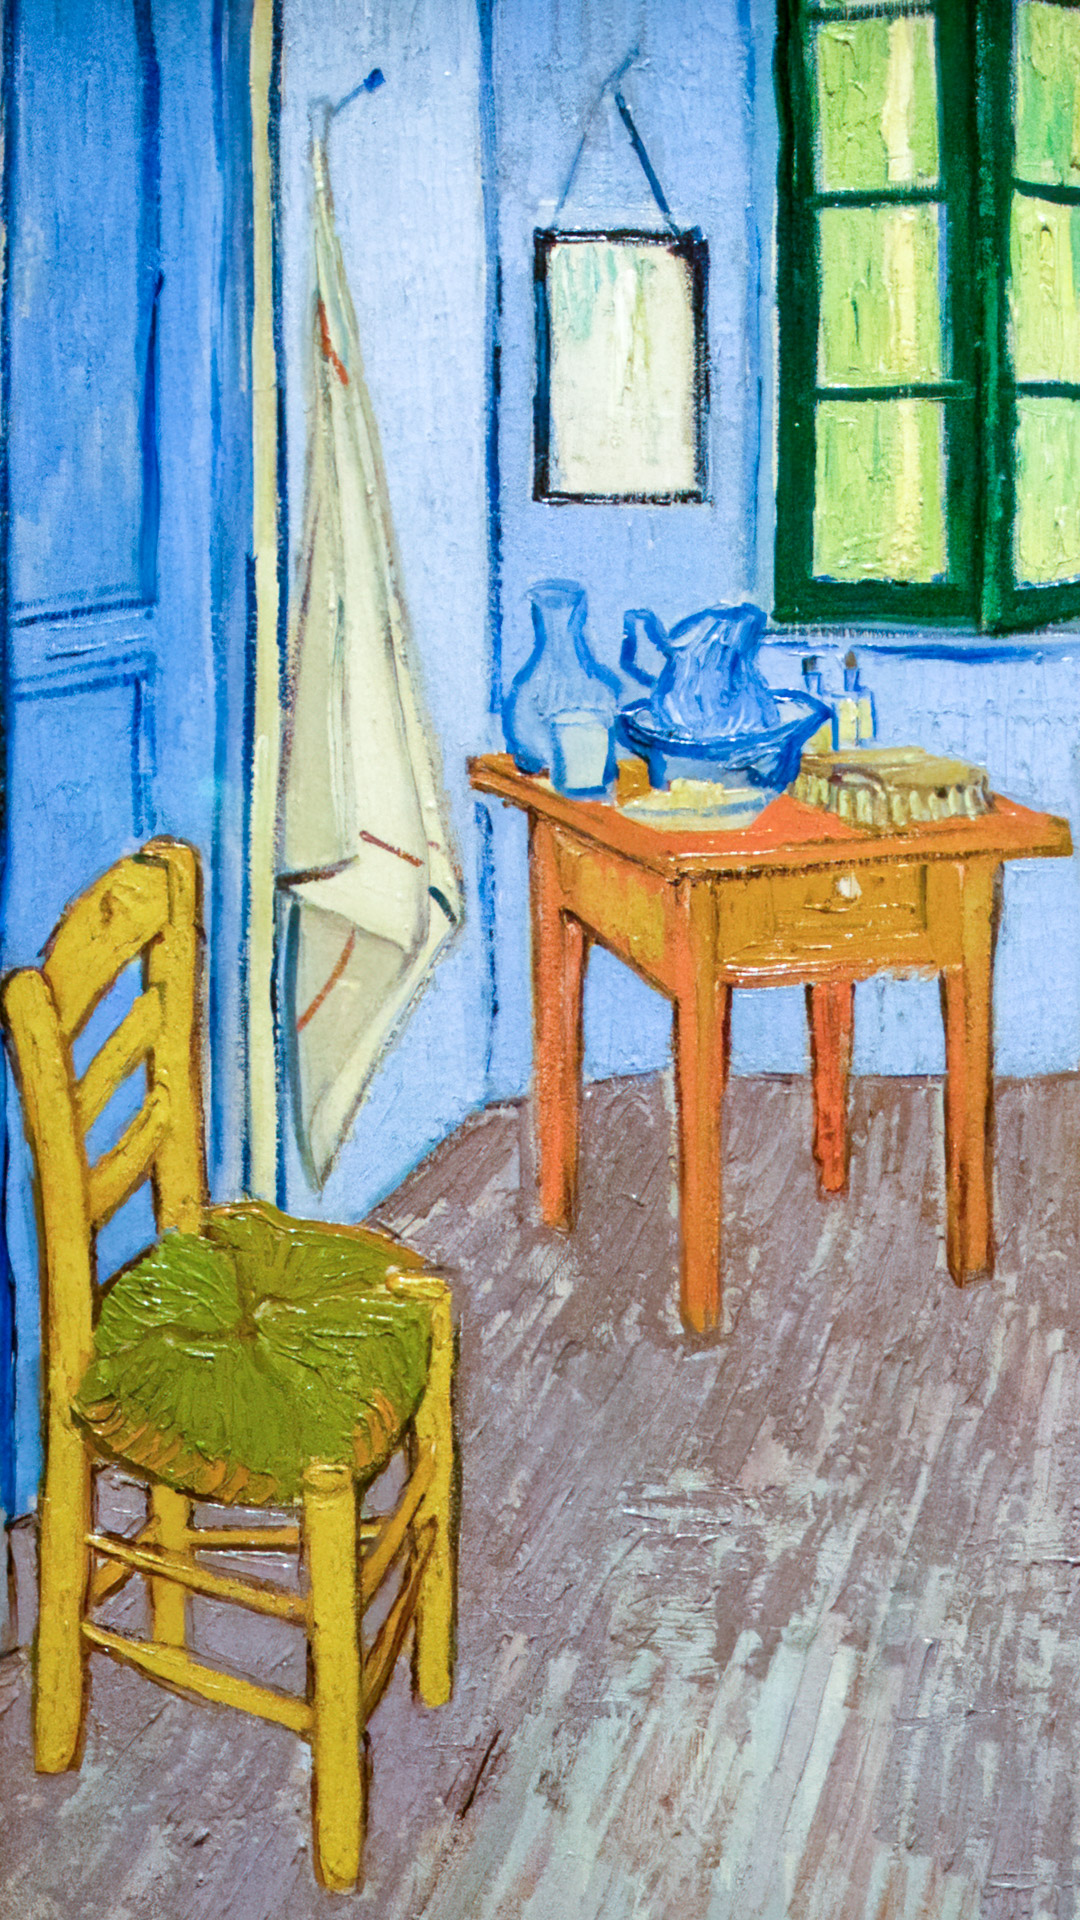 Room in Arles phone wallpaper in full HD brings the vibrant hues of Van Gogh's interior scenes to life on your mobile screen.